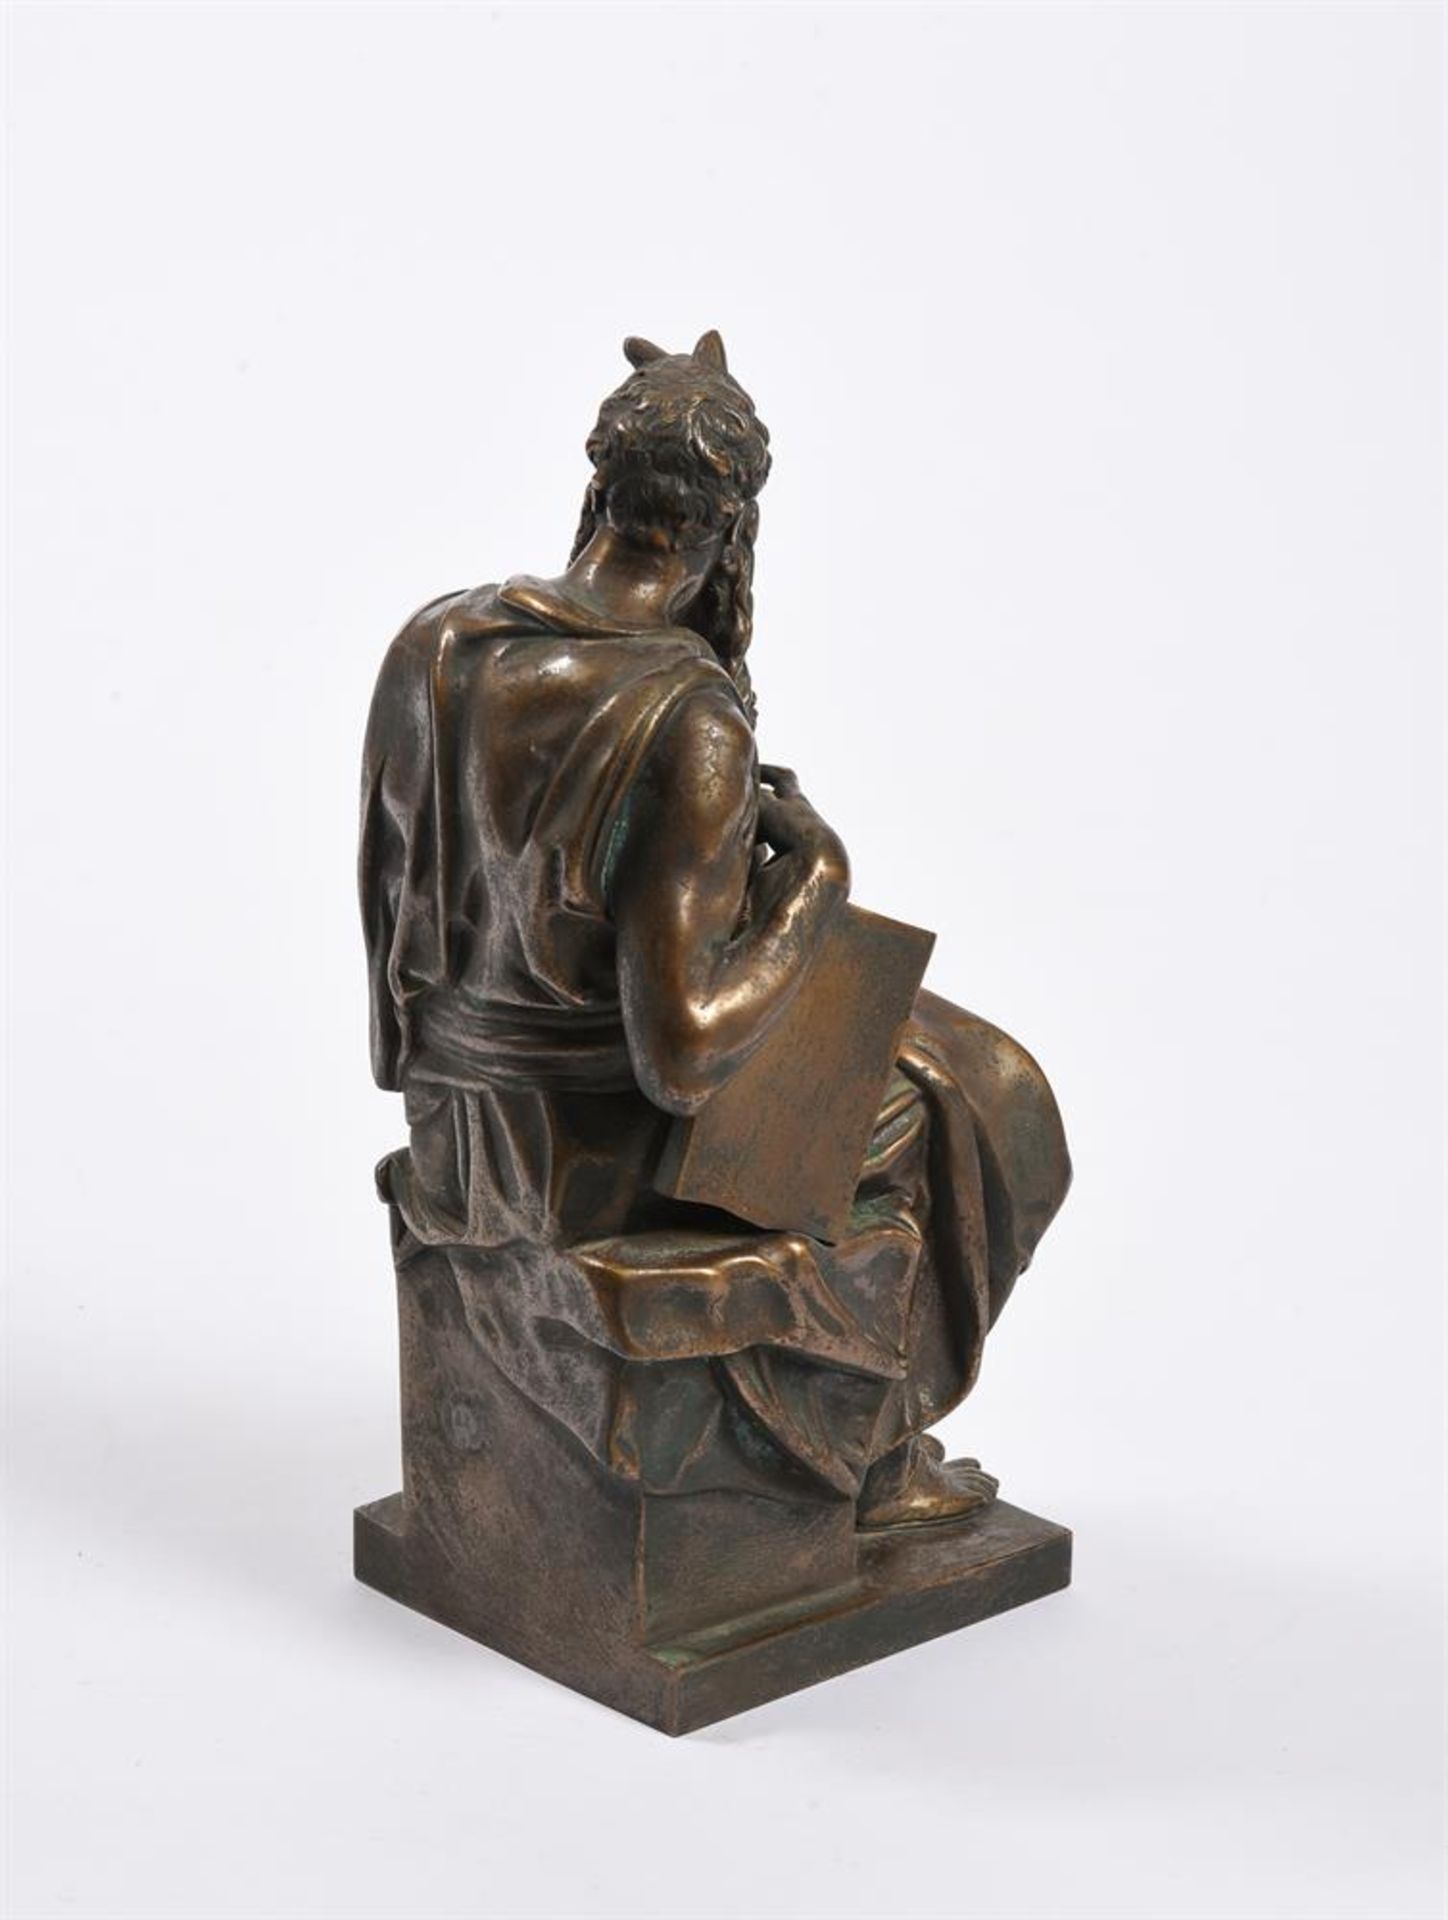 AFTER MICHELANGELO (1475-1564), A BRONZE FIGURE OF MOSES - Image 4 of 5